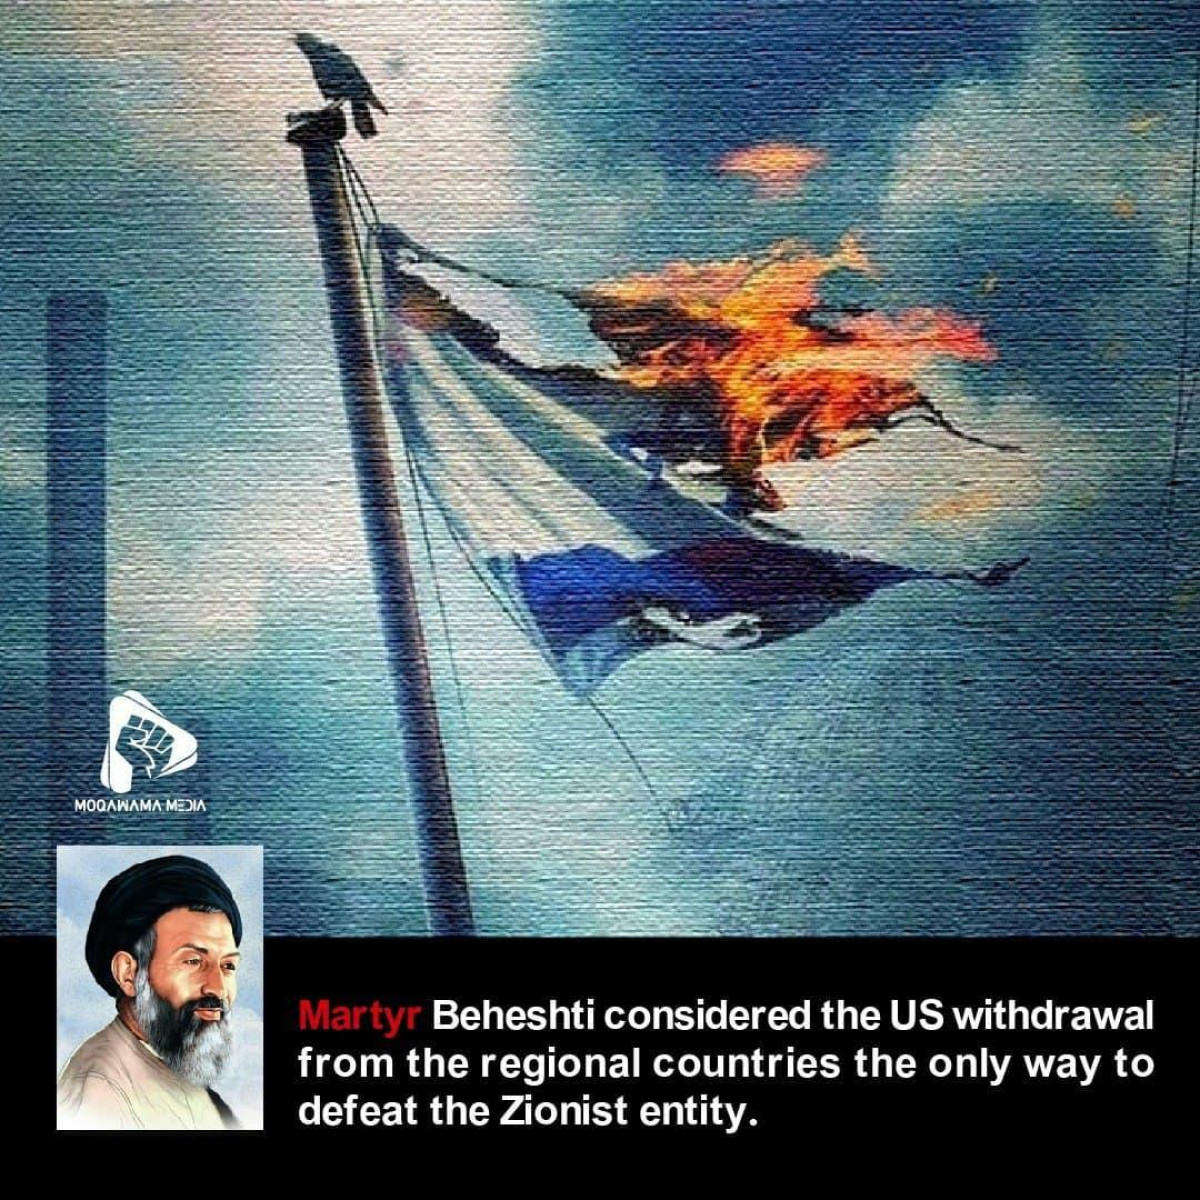 Martyr Beheshti considered the US withdrawal from the regional countries the only way to defeat the Zionist entity